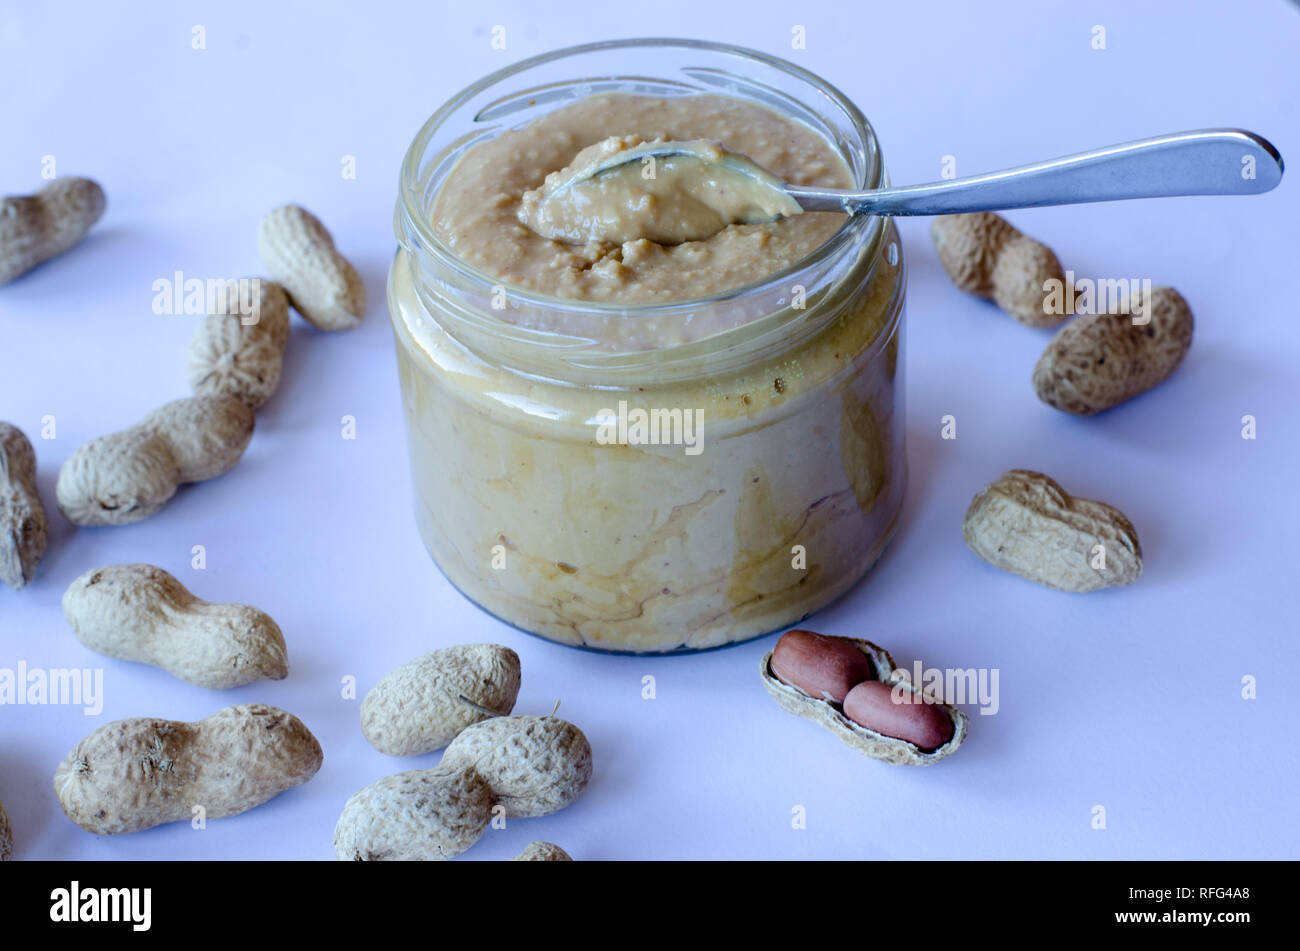 Homemade peanut butter in glass jar with peanuts spread on the table Stock Photo